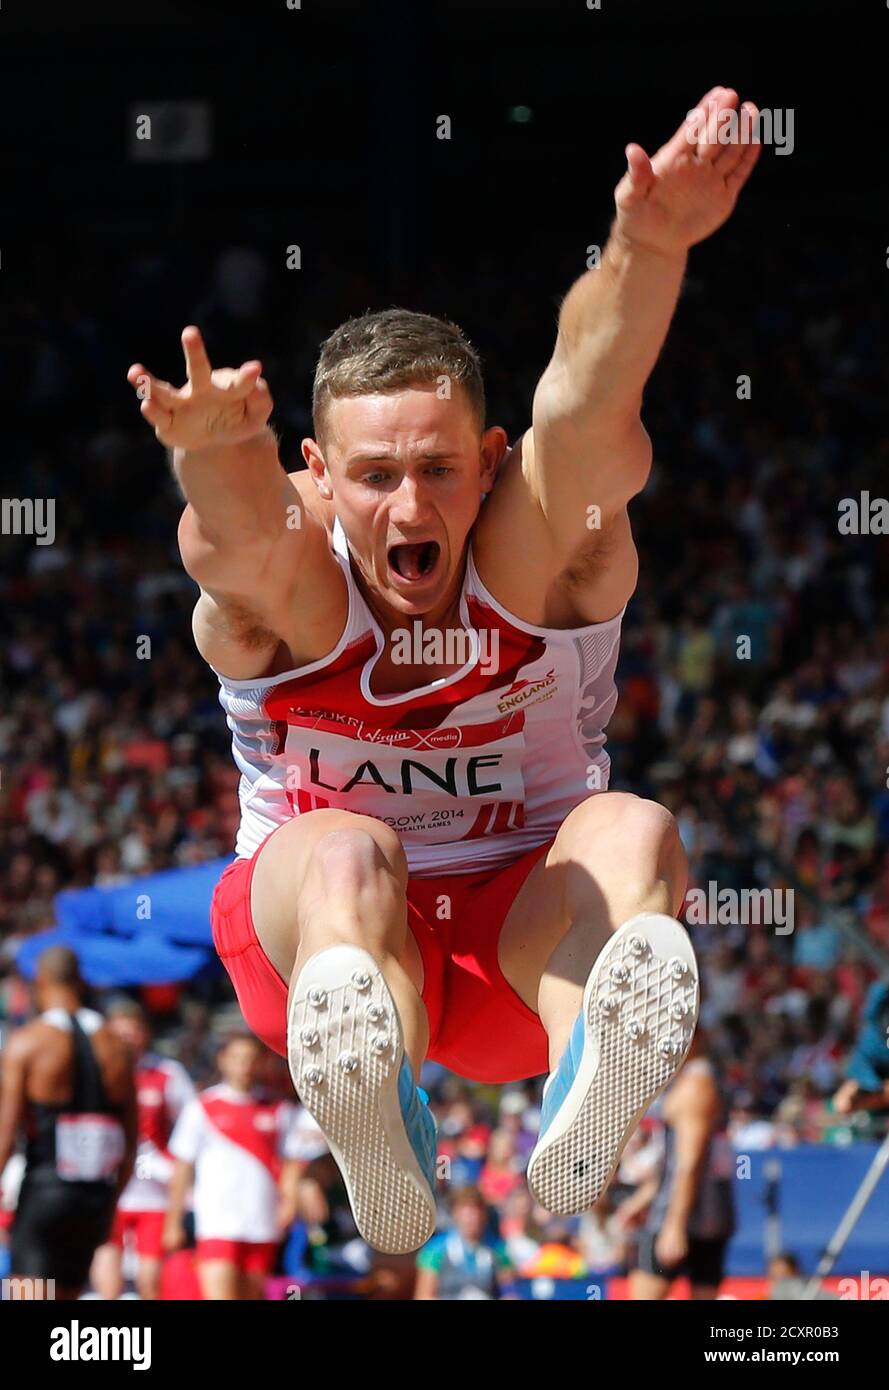 England's John Lane competes in the Men's Decathlon Long Jump at the 2014  Commonwealth Games in Glasgow, Scotland, July 28, 2014. REUTERS/Suzanne  Plunkett (BRITAIN - Tags: SPORT ATHLETICS Stock Photo - Alamy